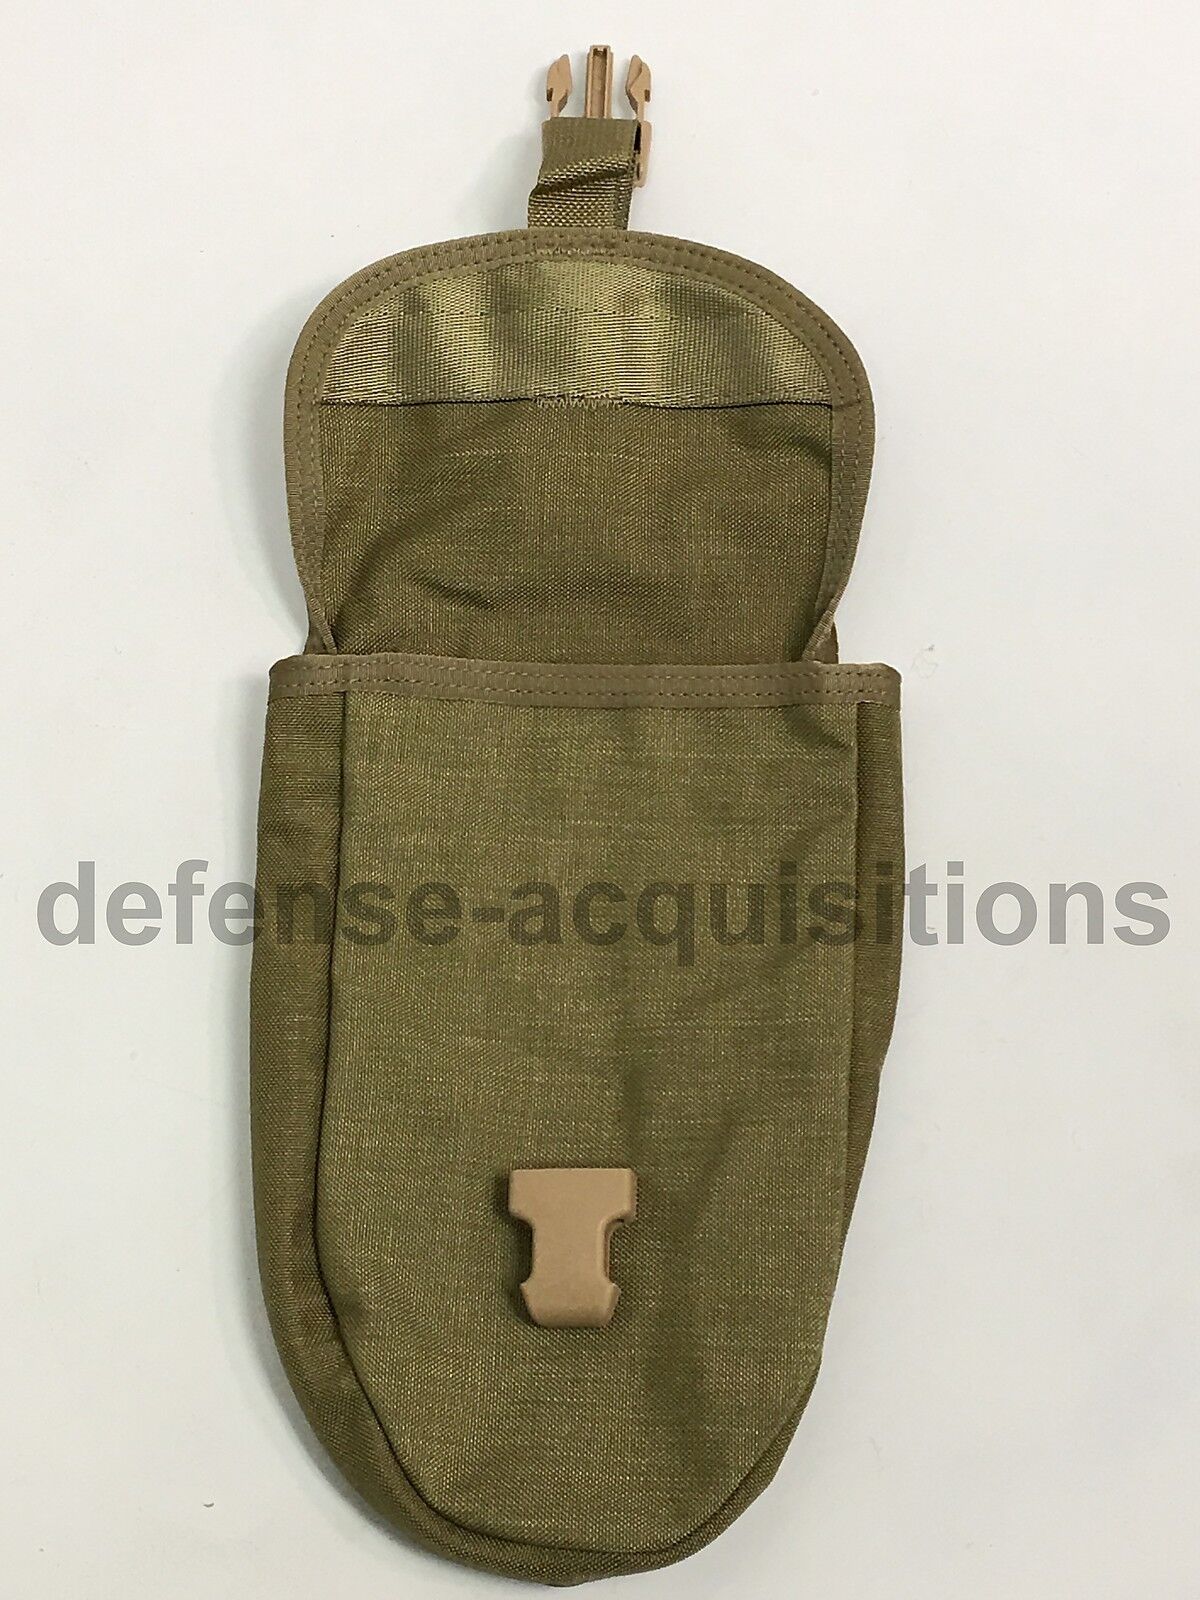 NEW Allied Industries Entrenching Etool Pouch E Tool MJK Khaki Black Buckle